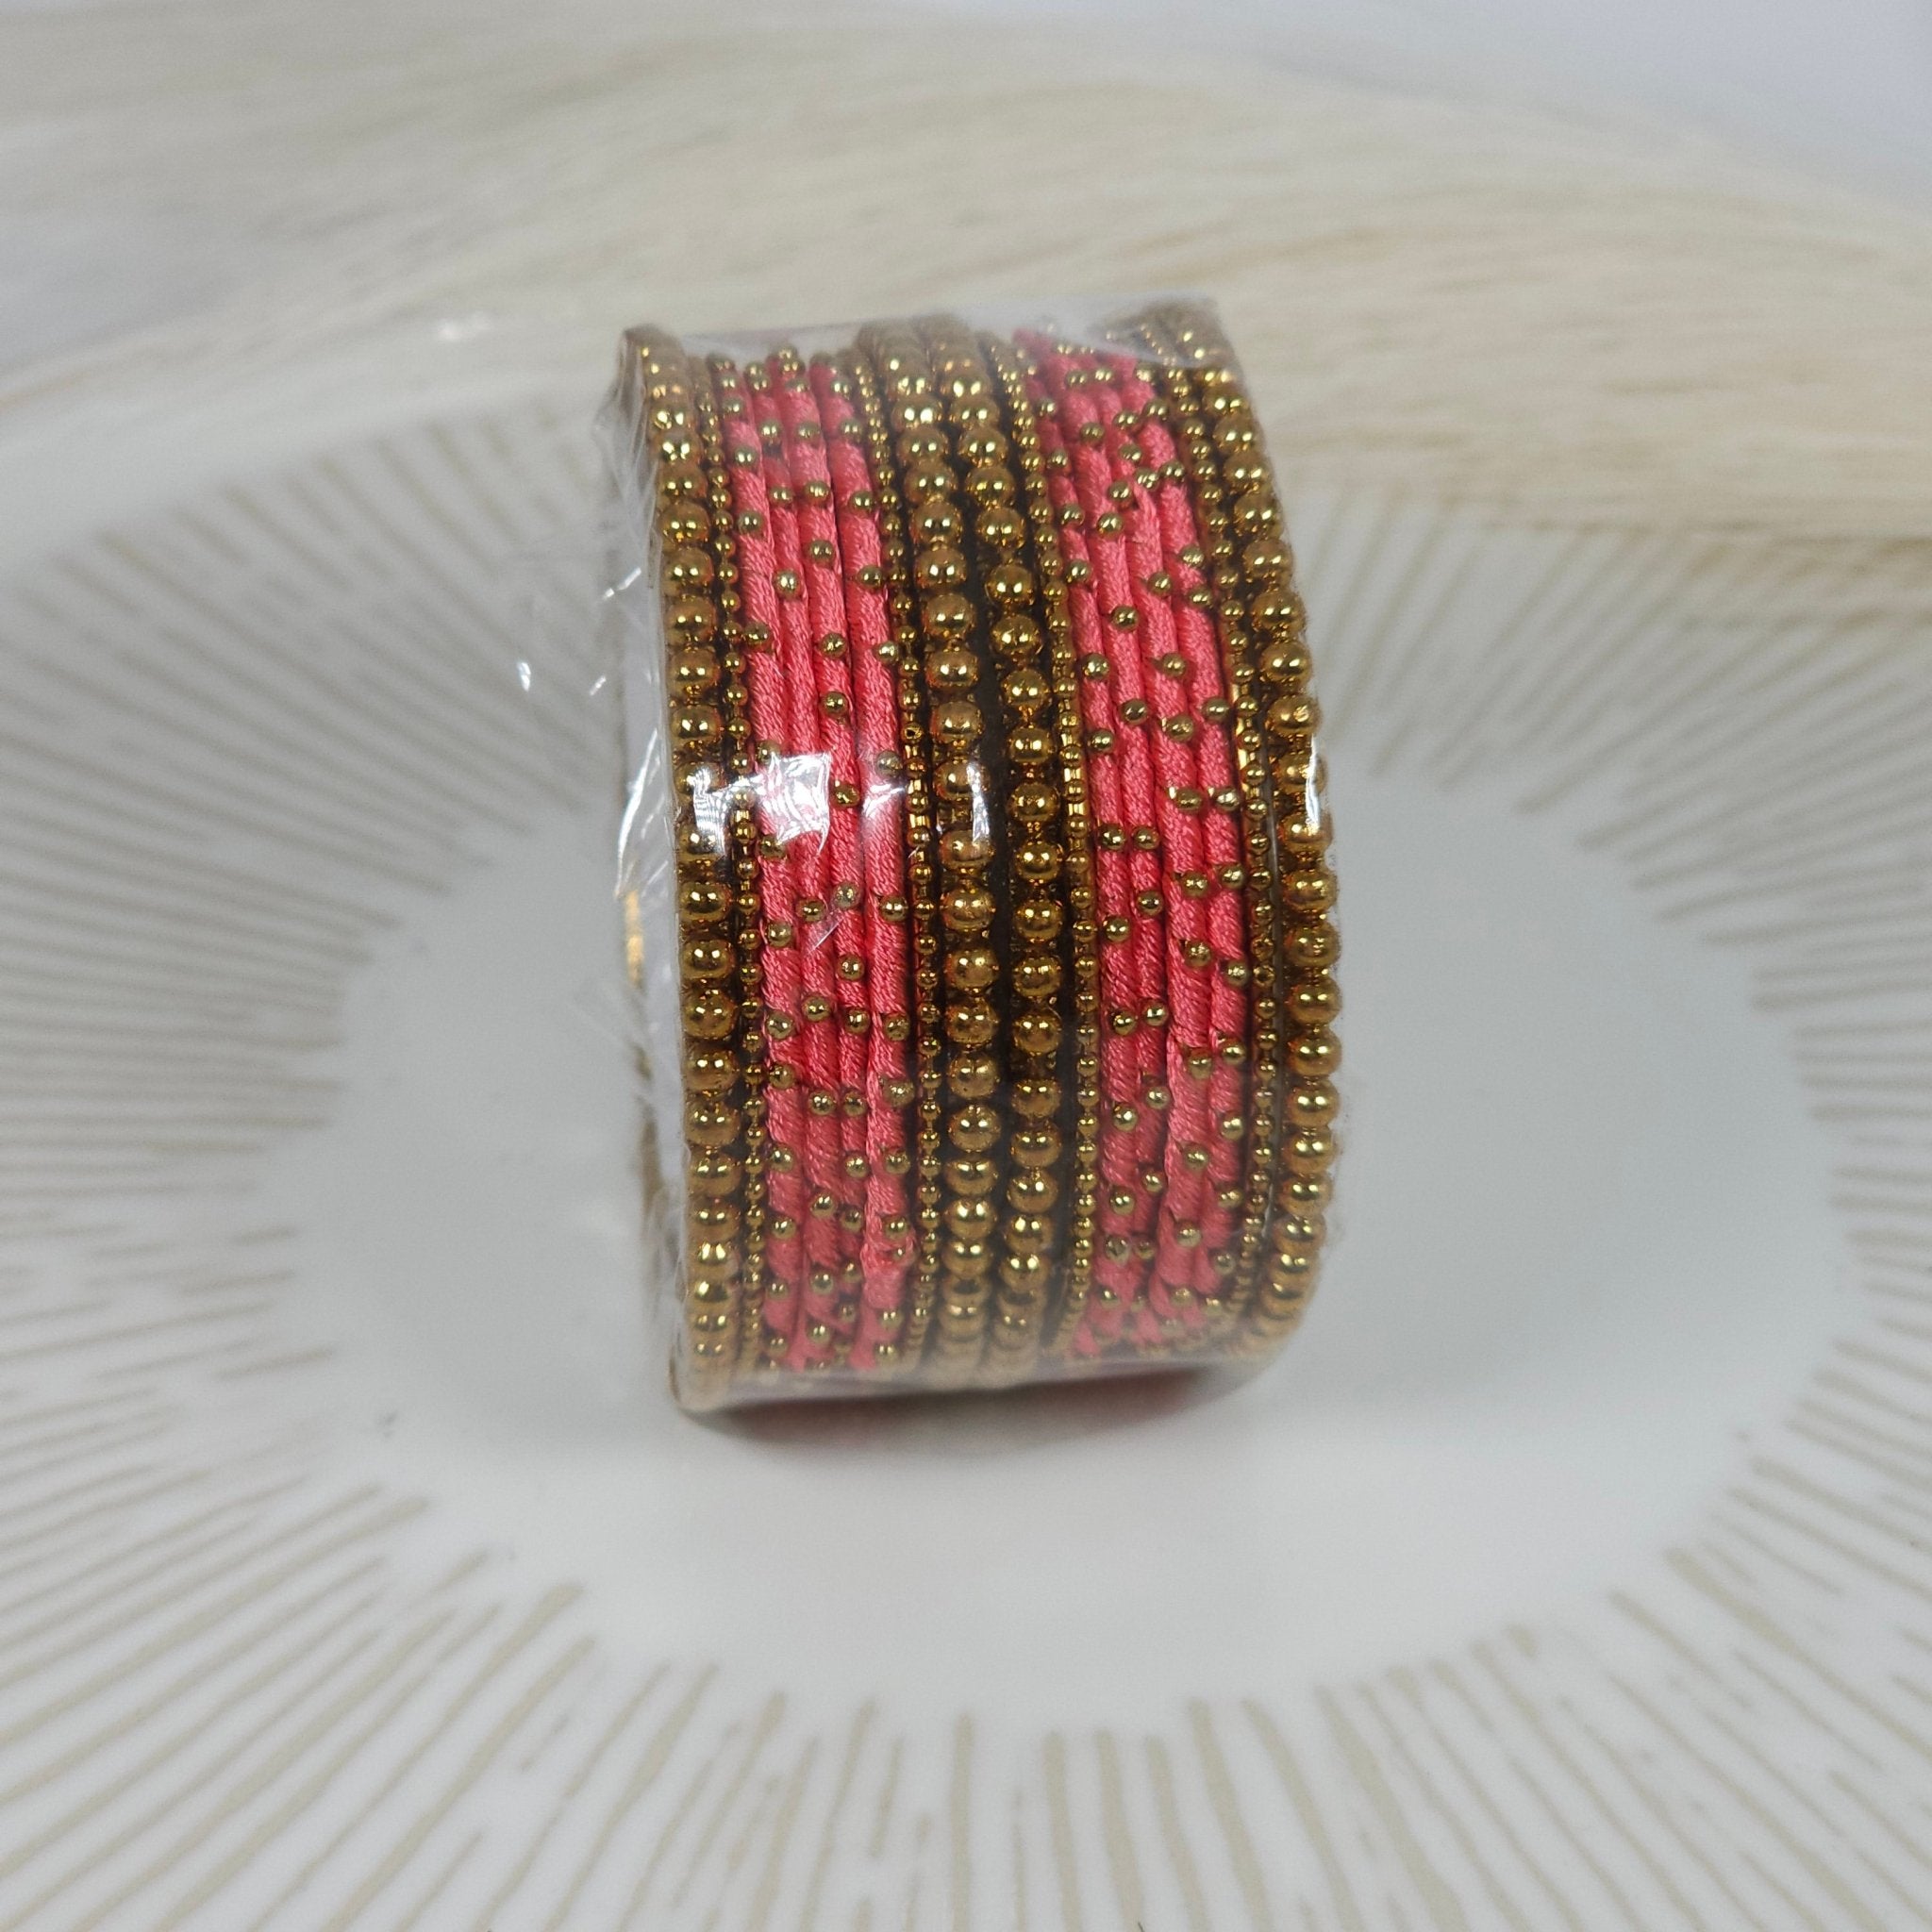 16 pcs Thread Bangle Set - Available in Many Colours - Fancy Fab Jewels